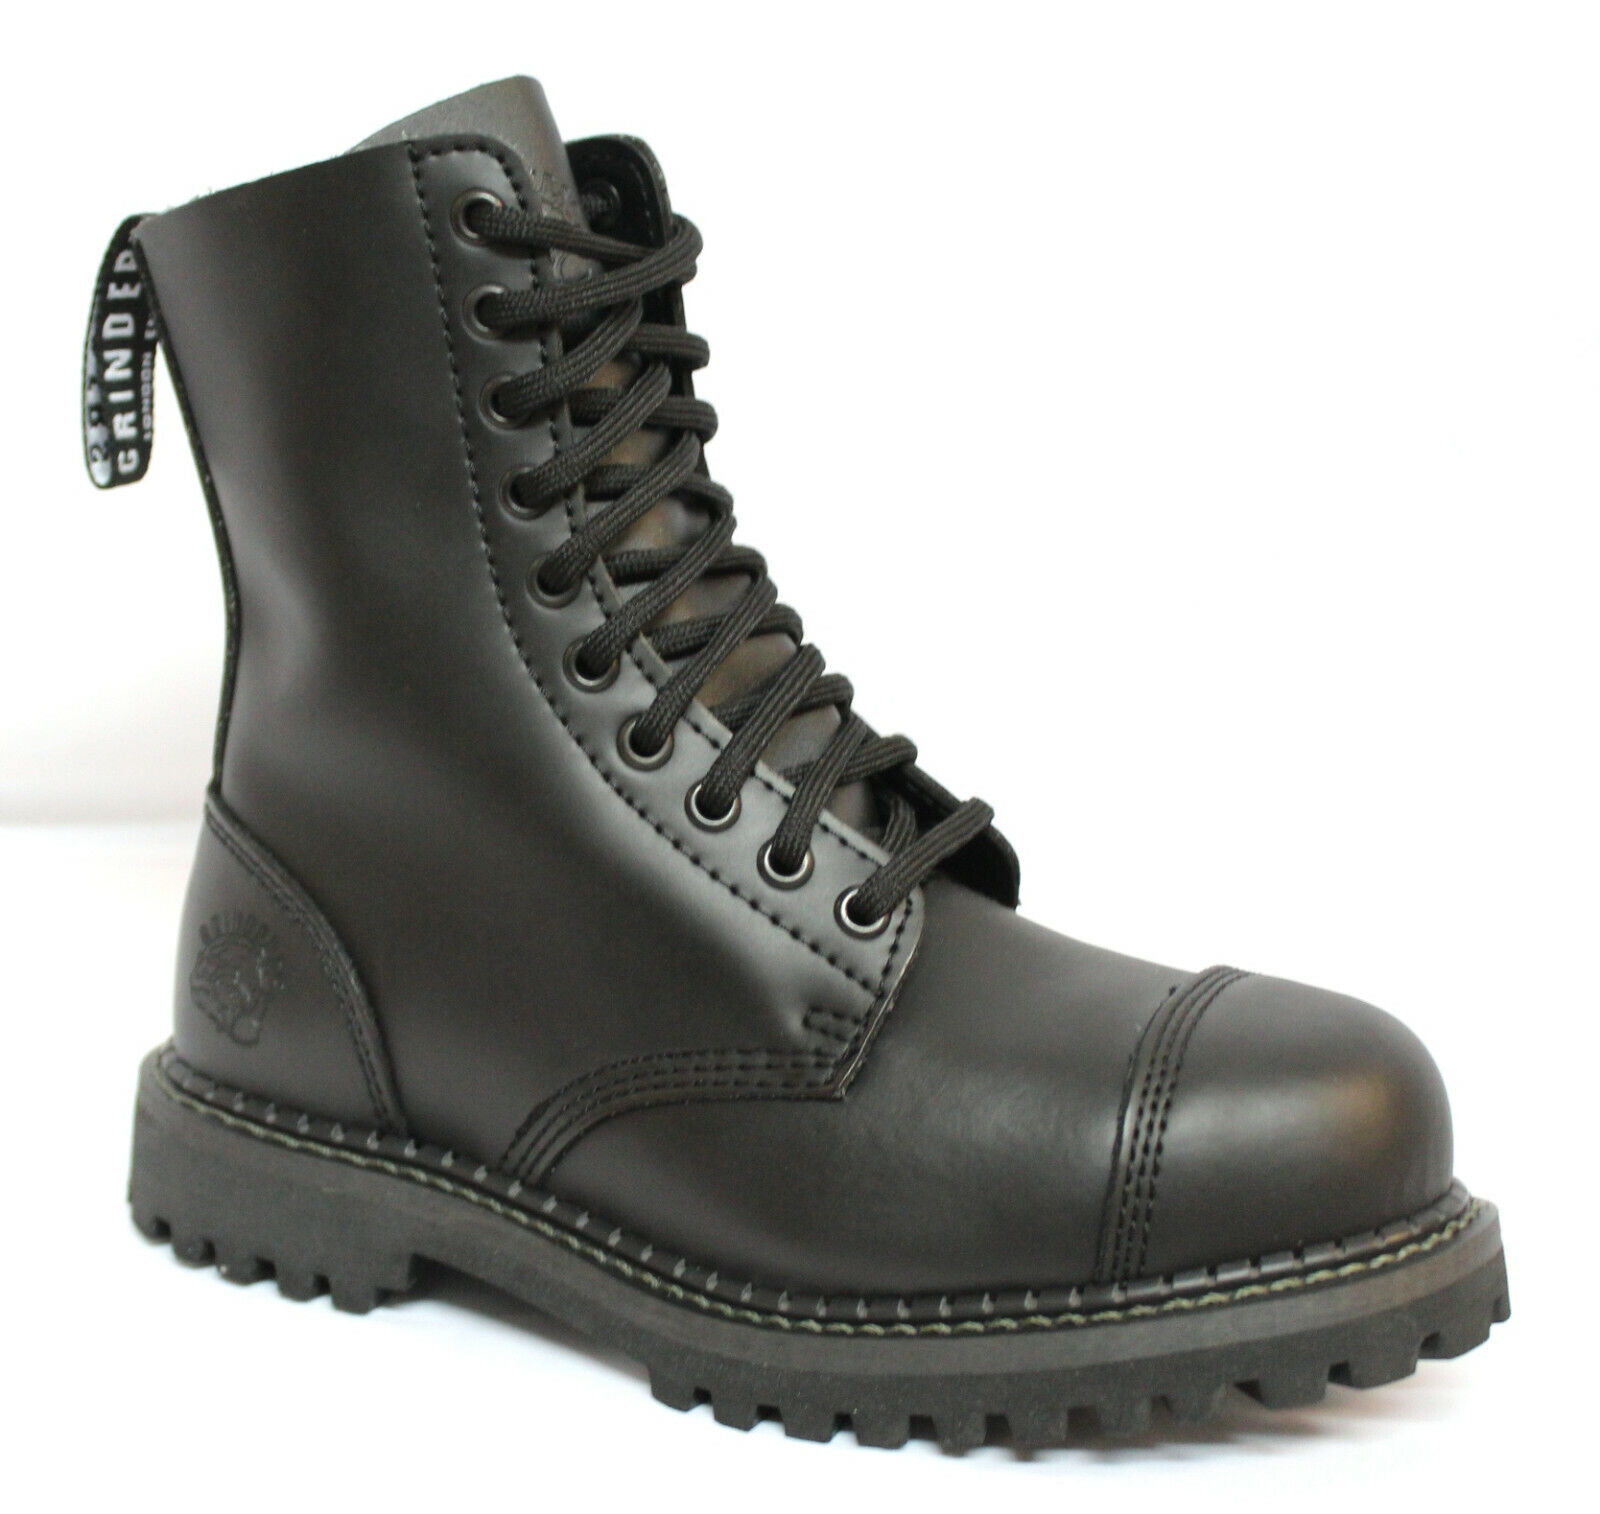 Grinders Stag CS Black Leather Boots 10 Eye Hole Steel Toe Cap Military Punk